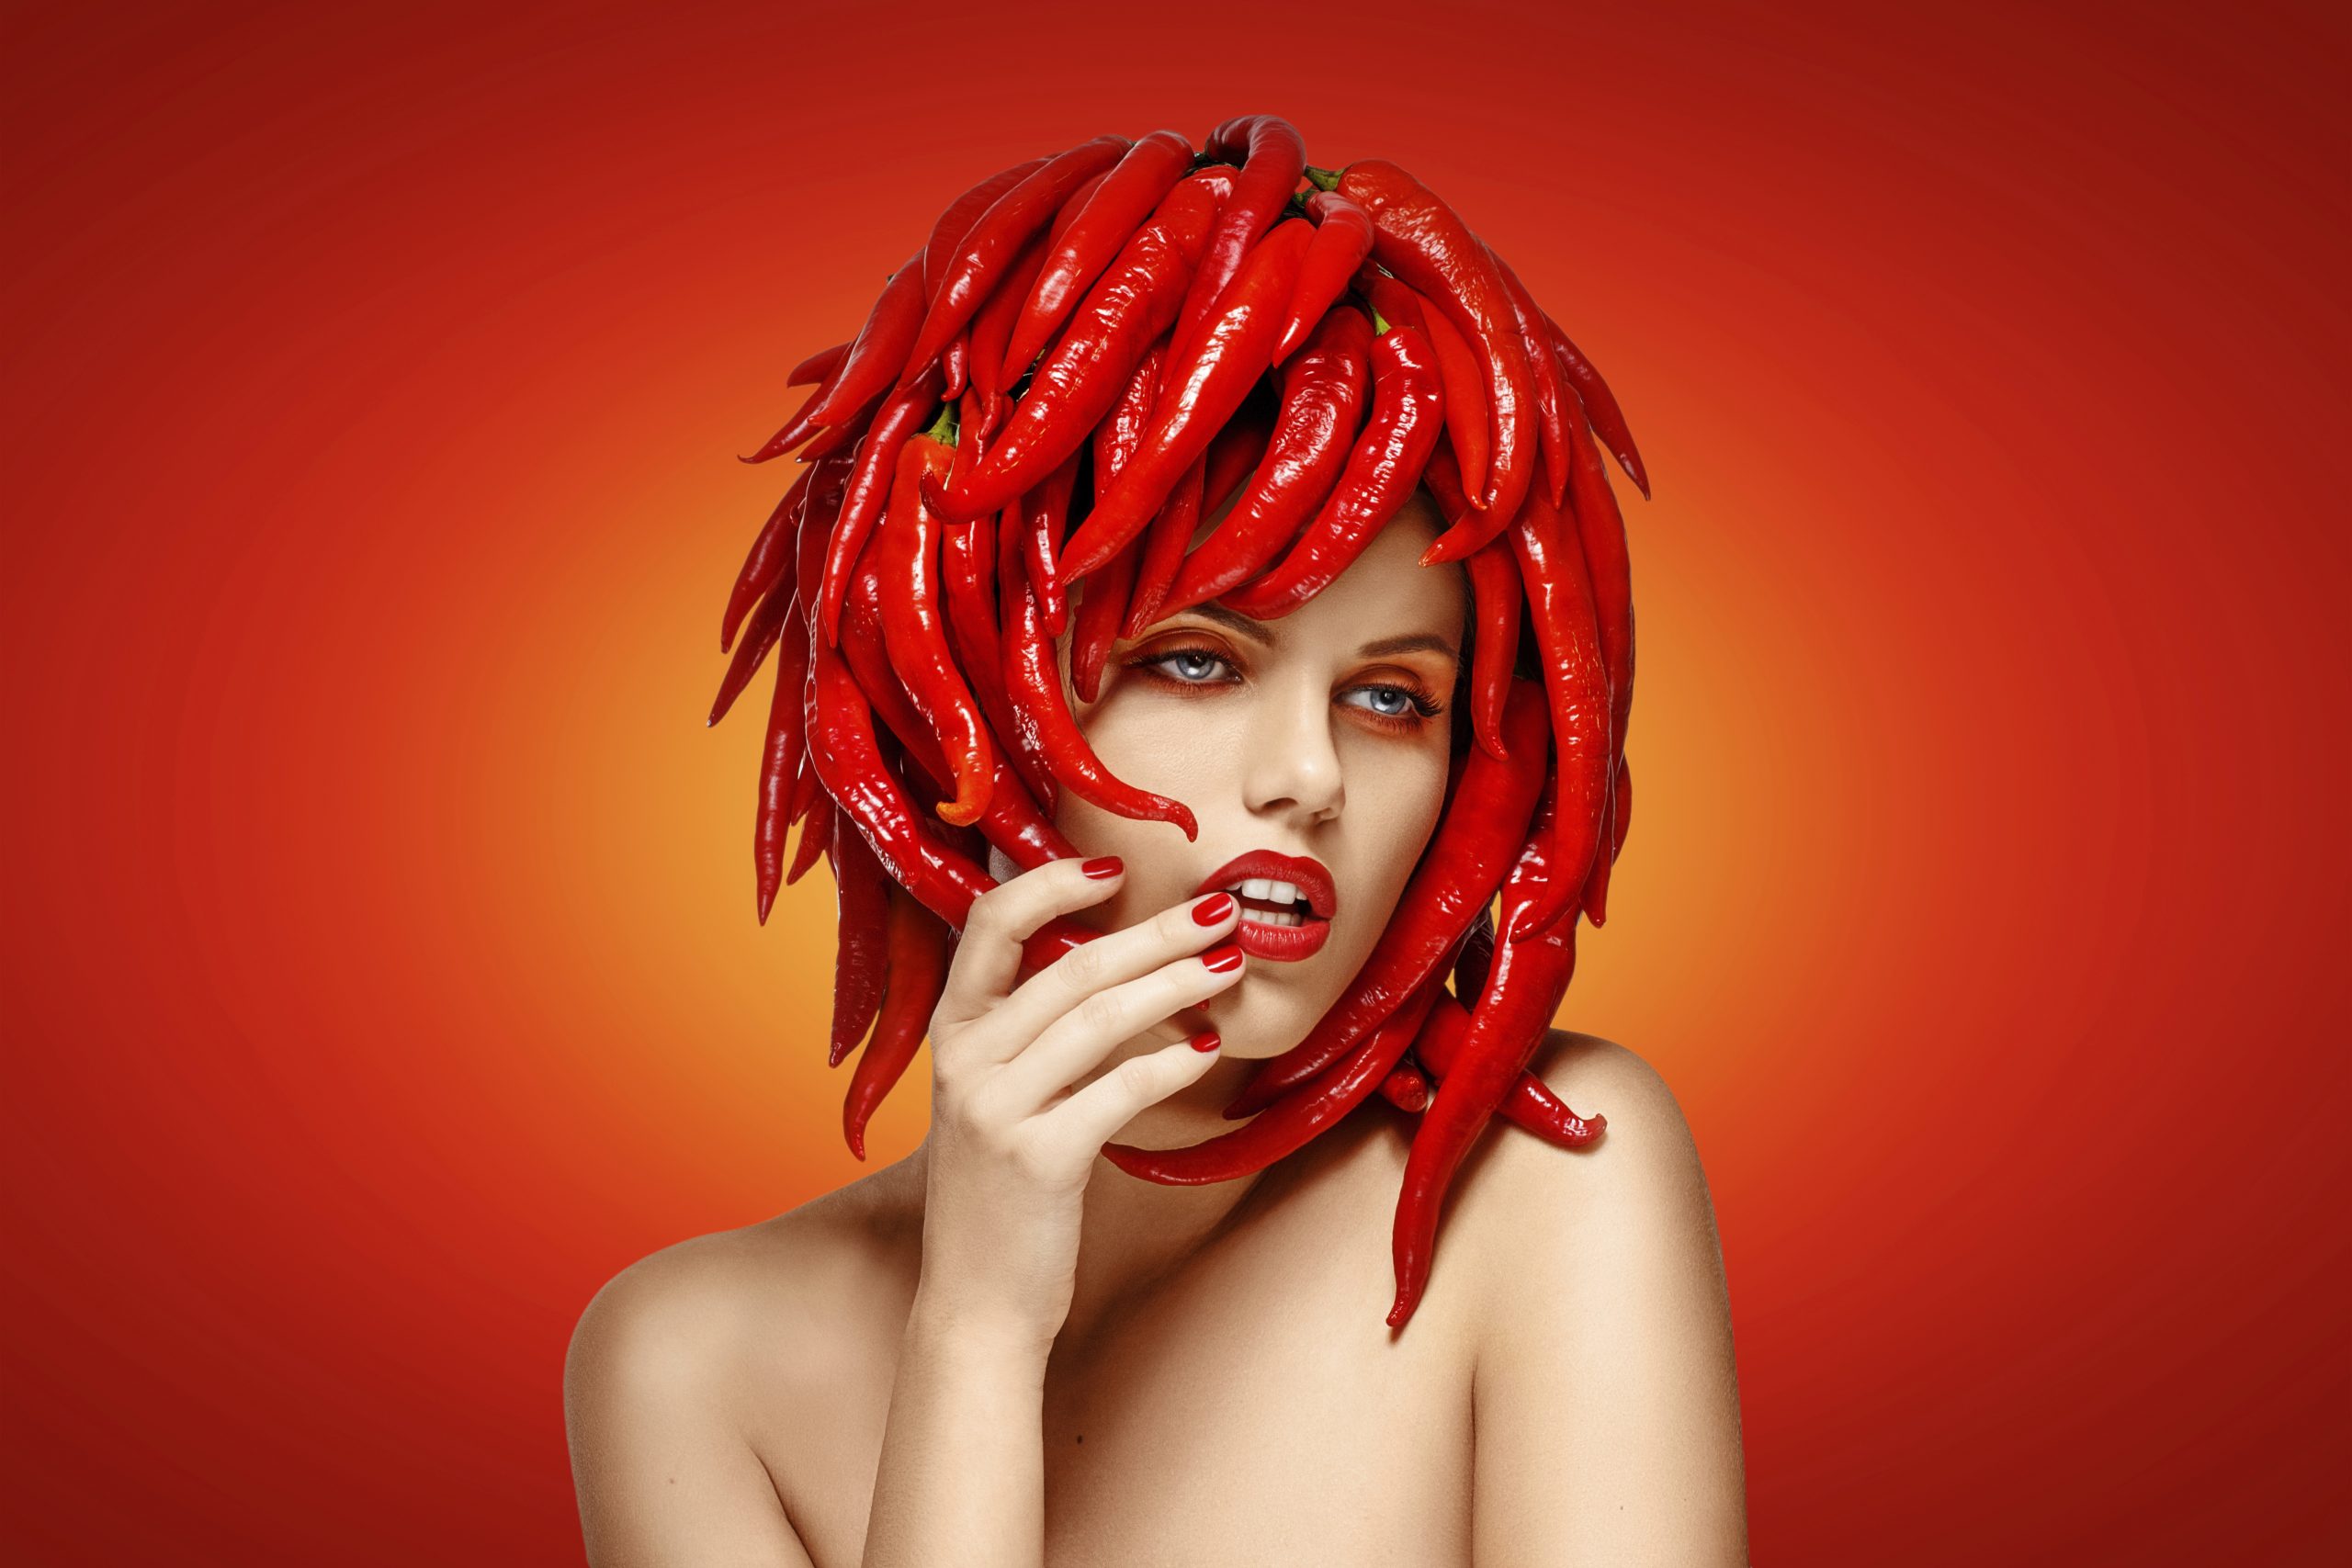 Masquerade. Fashionable Woman with Creative Hairdo - Red Chili Pepper